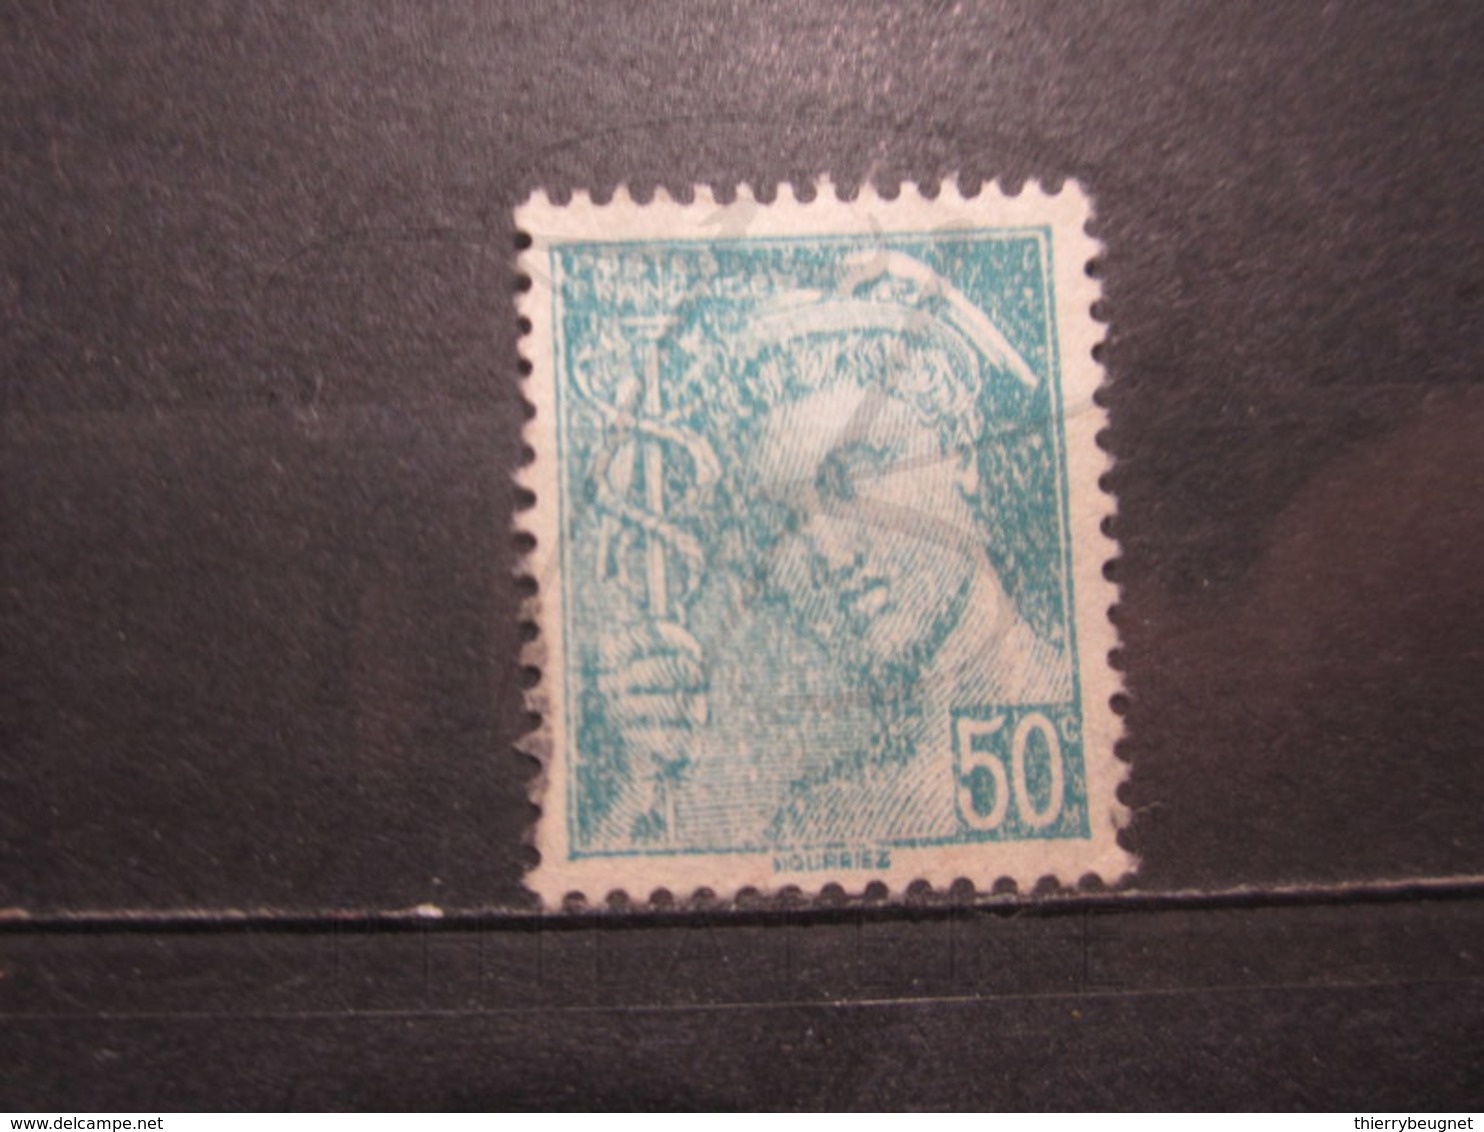 VEND BEAU TIMBRE FRANCE N° 549 , IMPRESSION DEFECTUEUSE !!! - Gebraucht